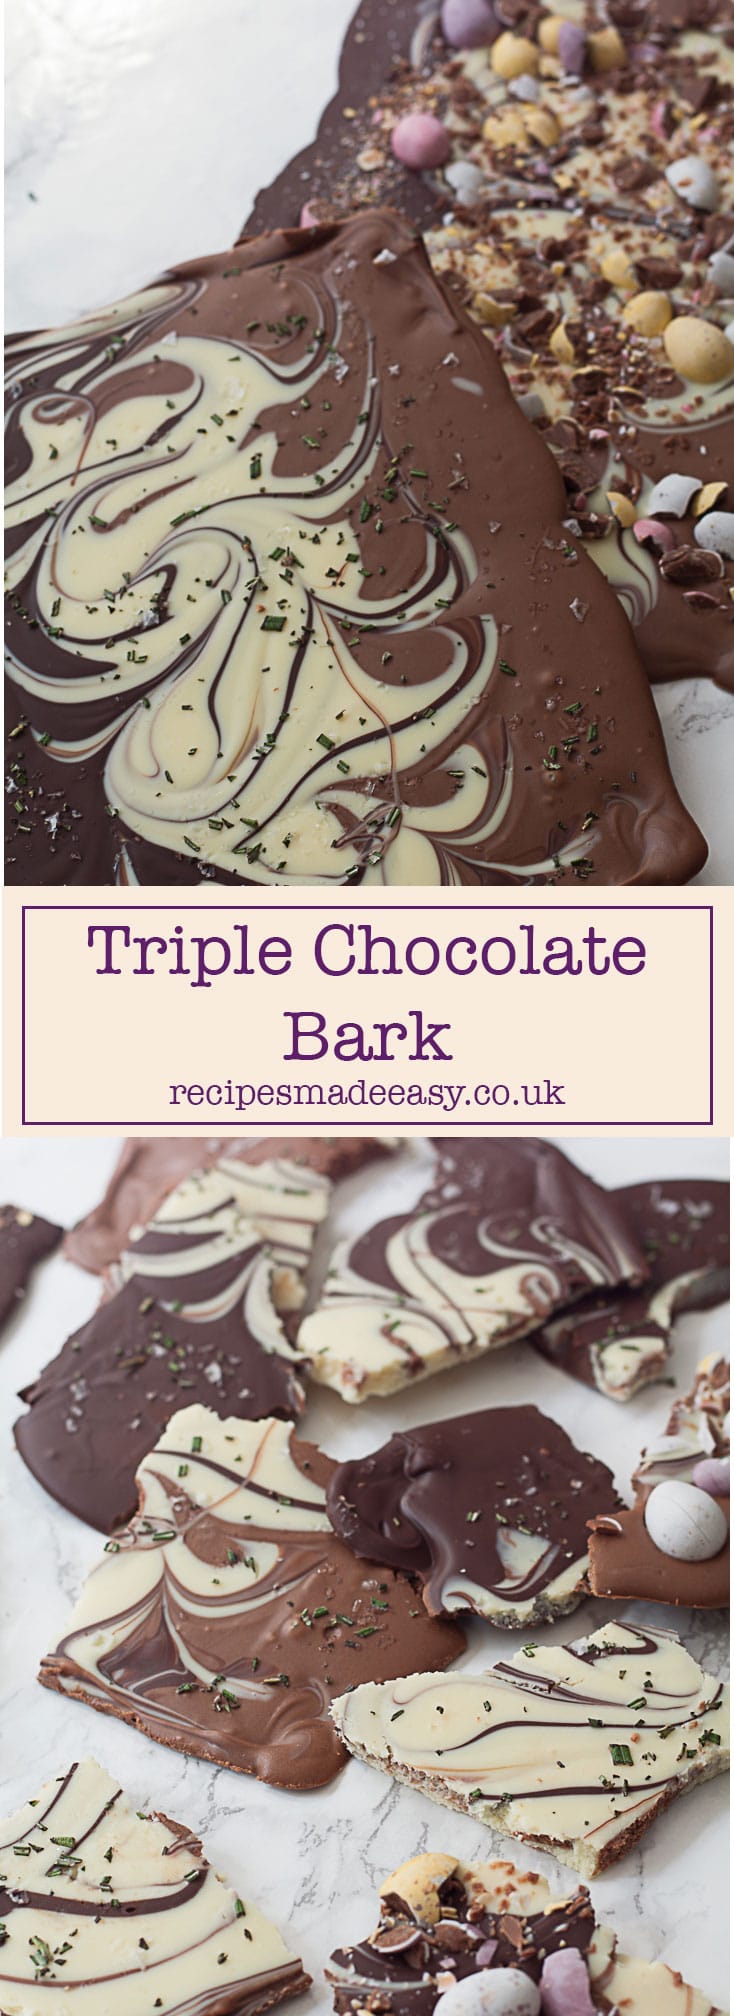 Triple Chocolate Bark: Thermapen Giveaway | Recipes Made Easy